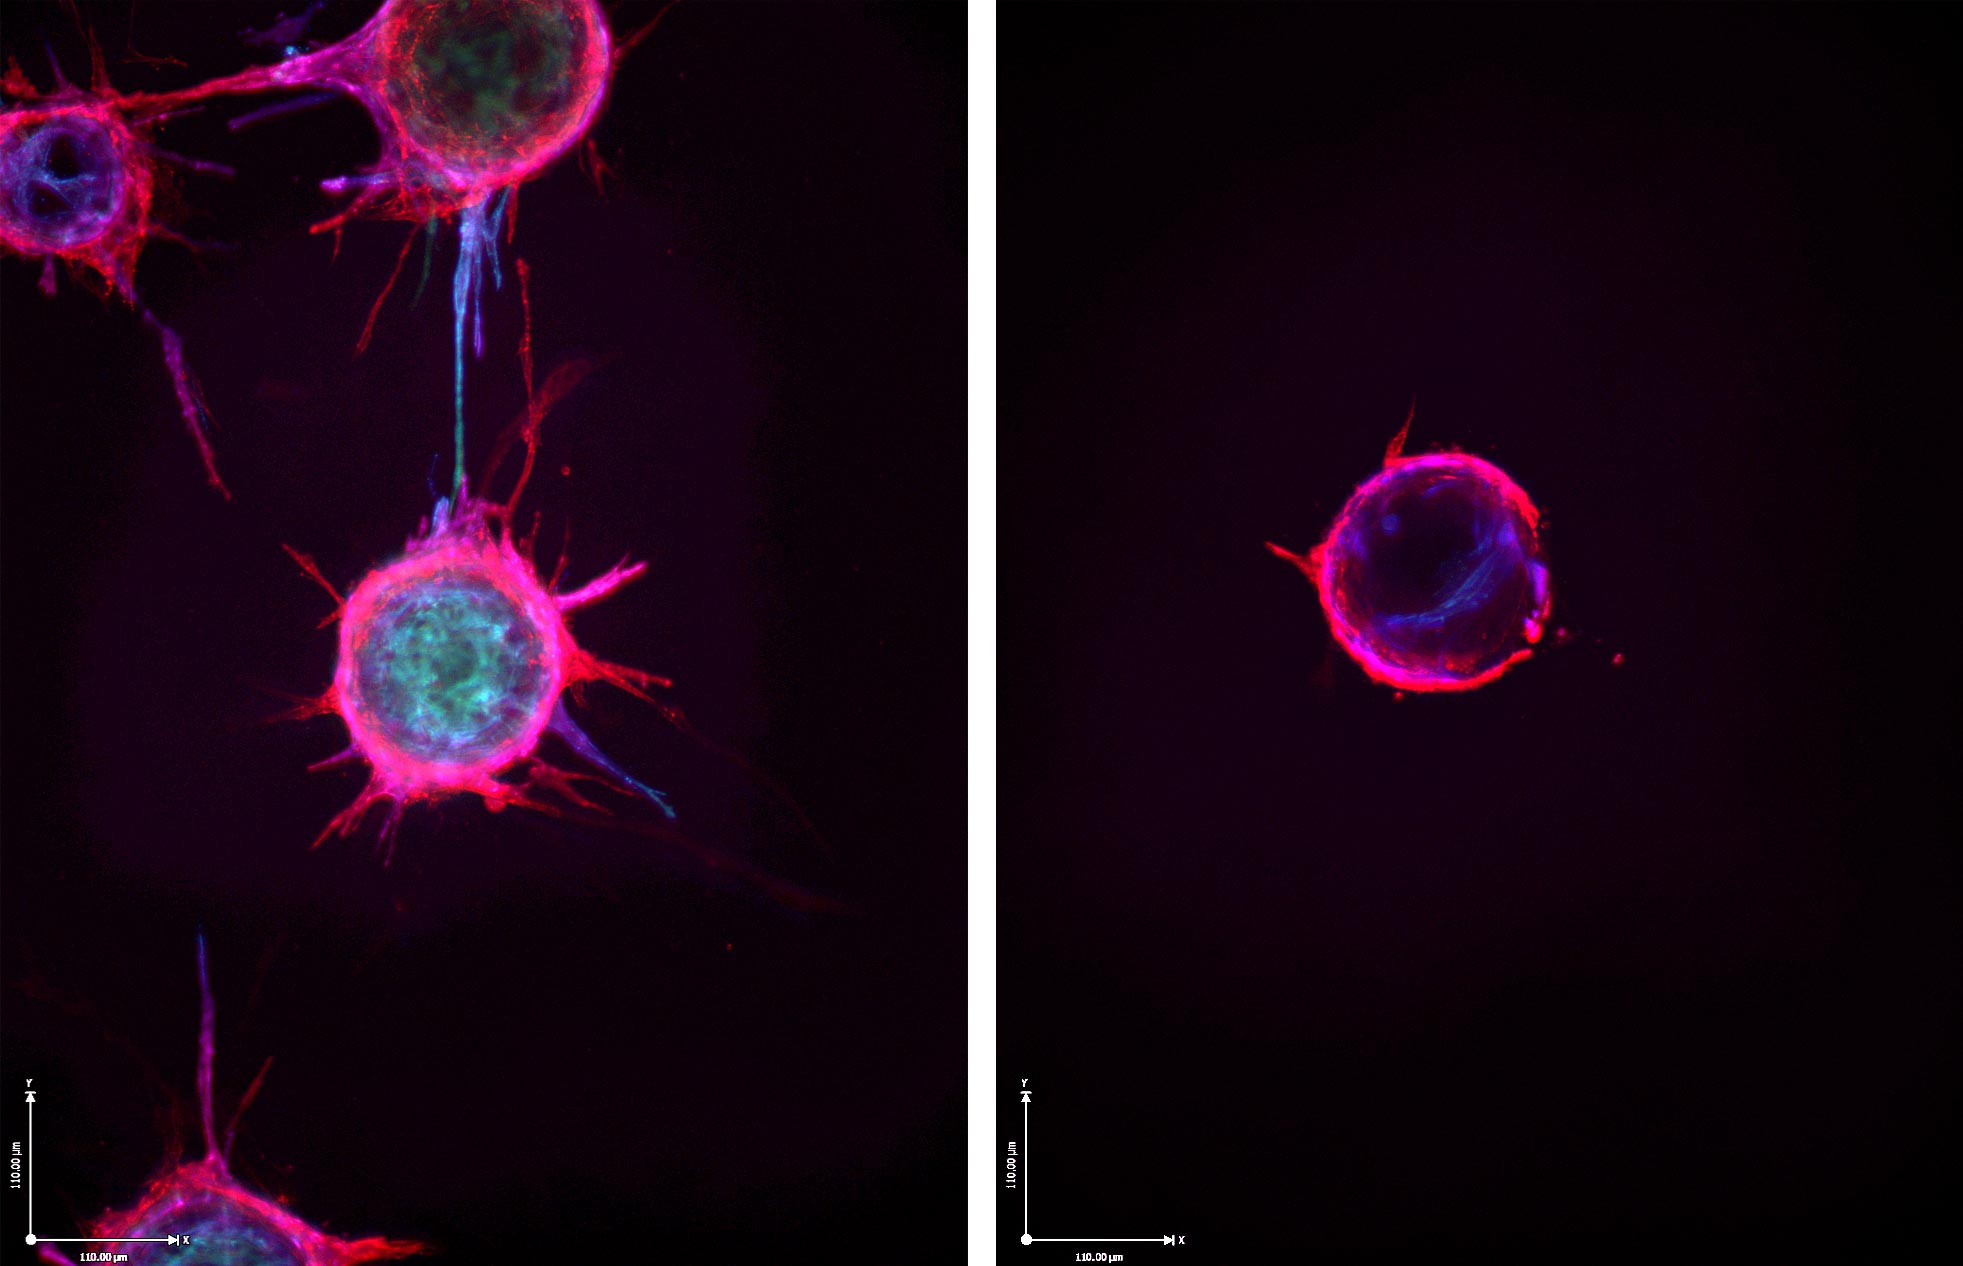 left: depicts blood vessel budding. Right: shows the lack of budding after treatment with microRNA